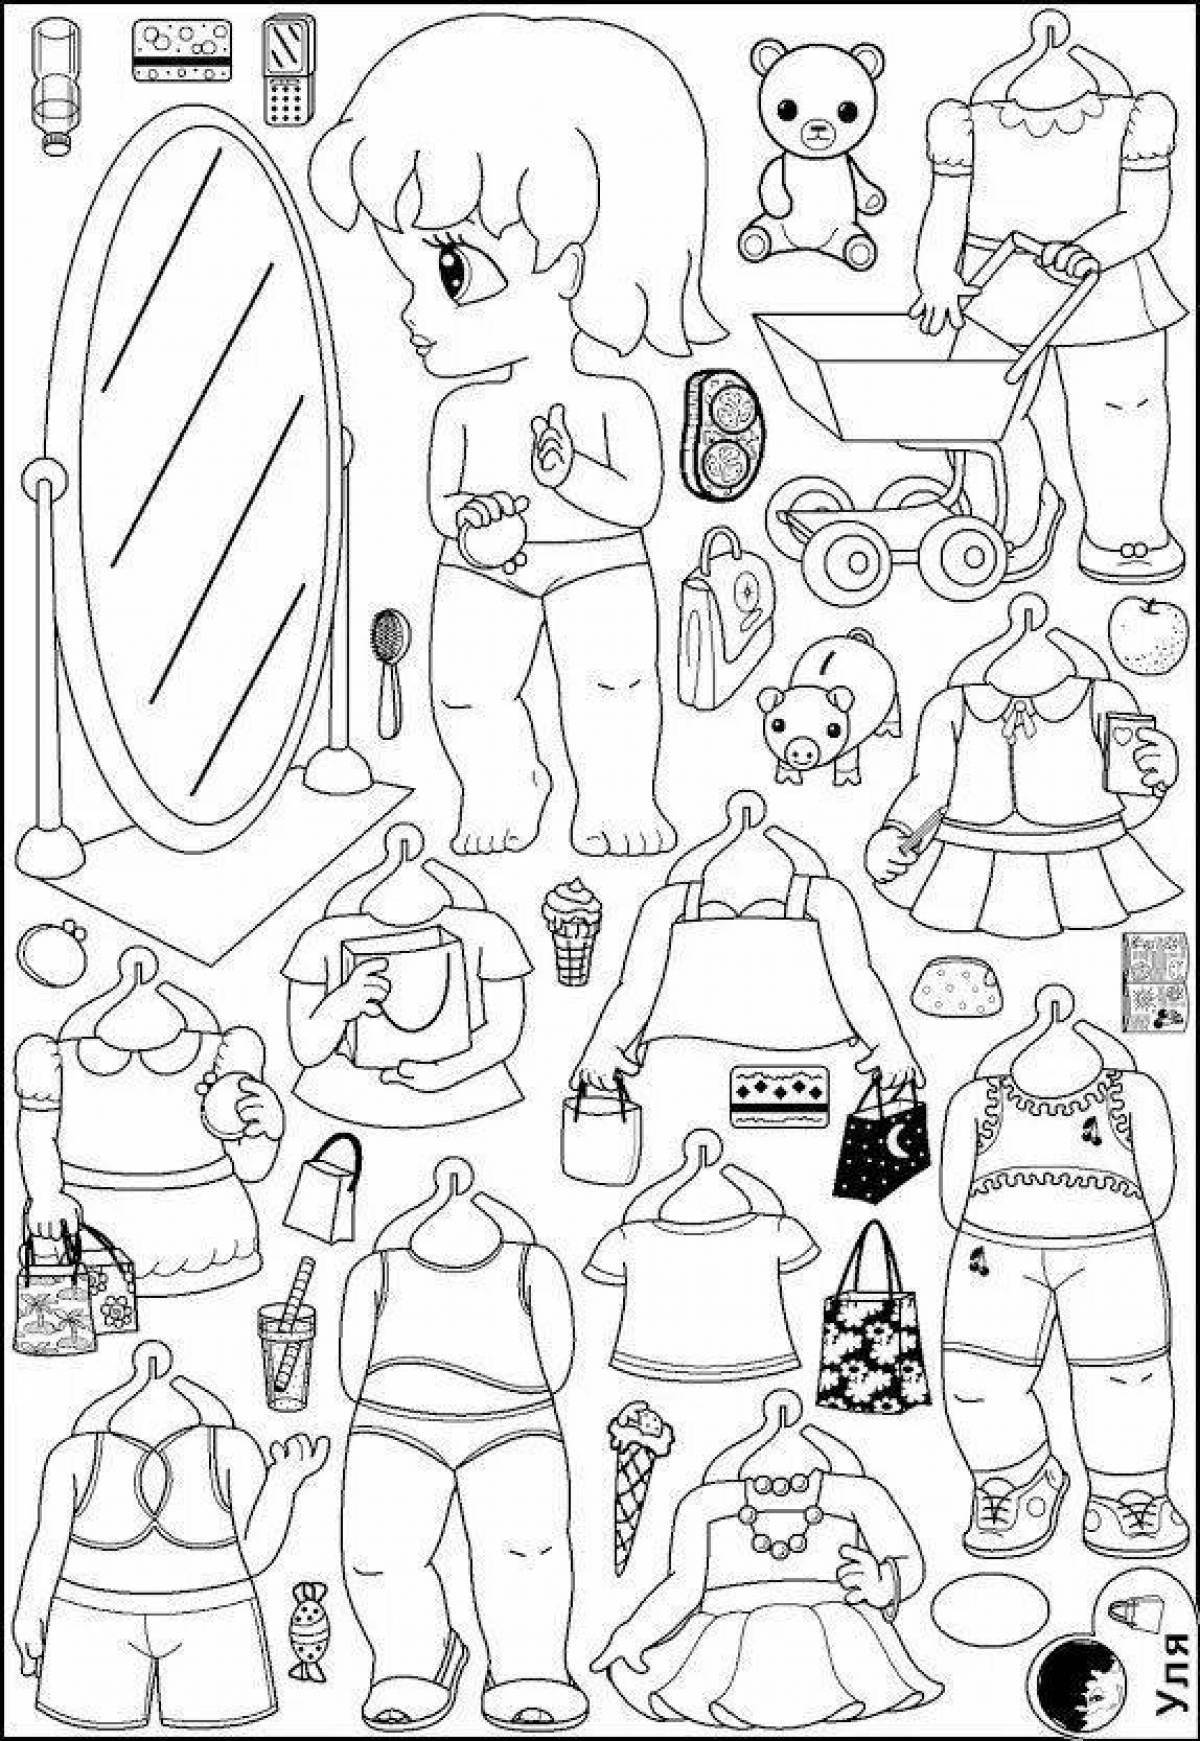 Adorable lol doll coloring book with paper cut clothes